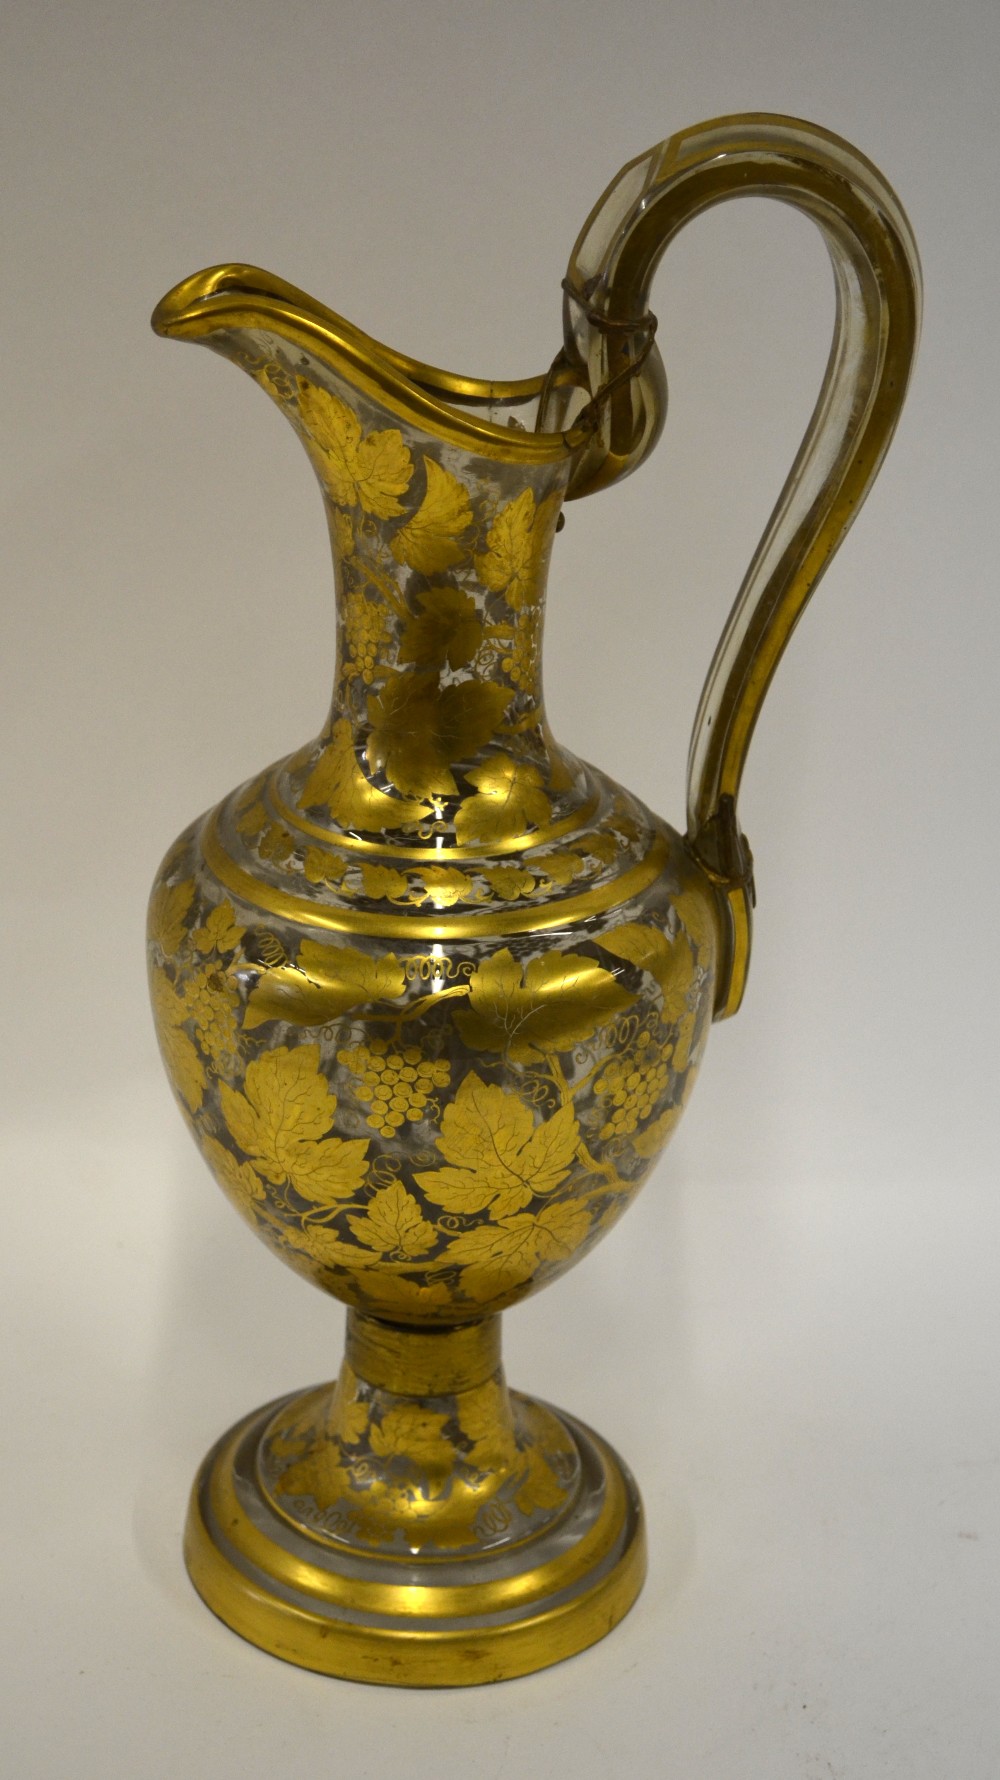 A 19th century continental glass wine ewer ornately decorated with fruit and vine, 40 cm h.